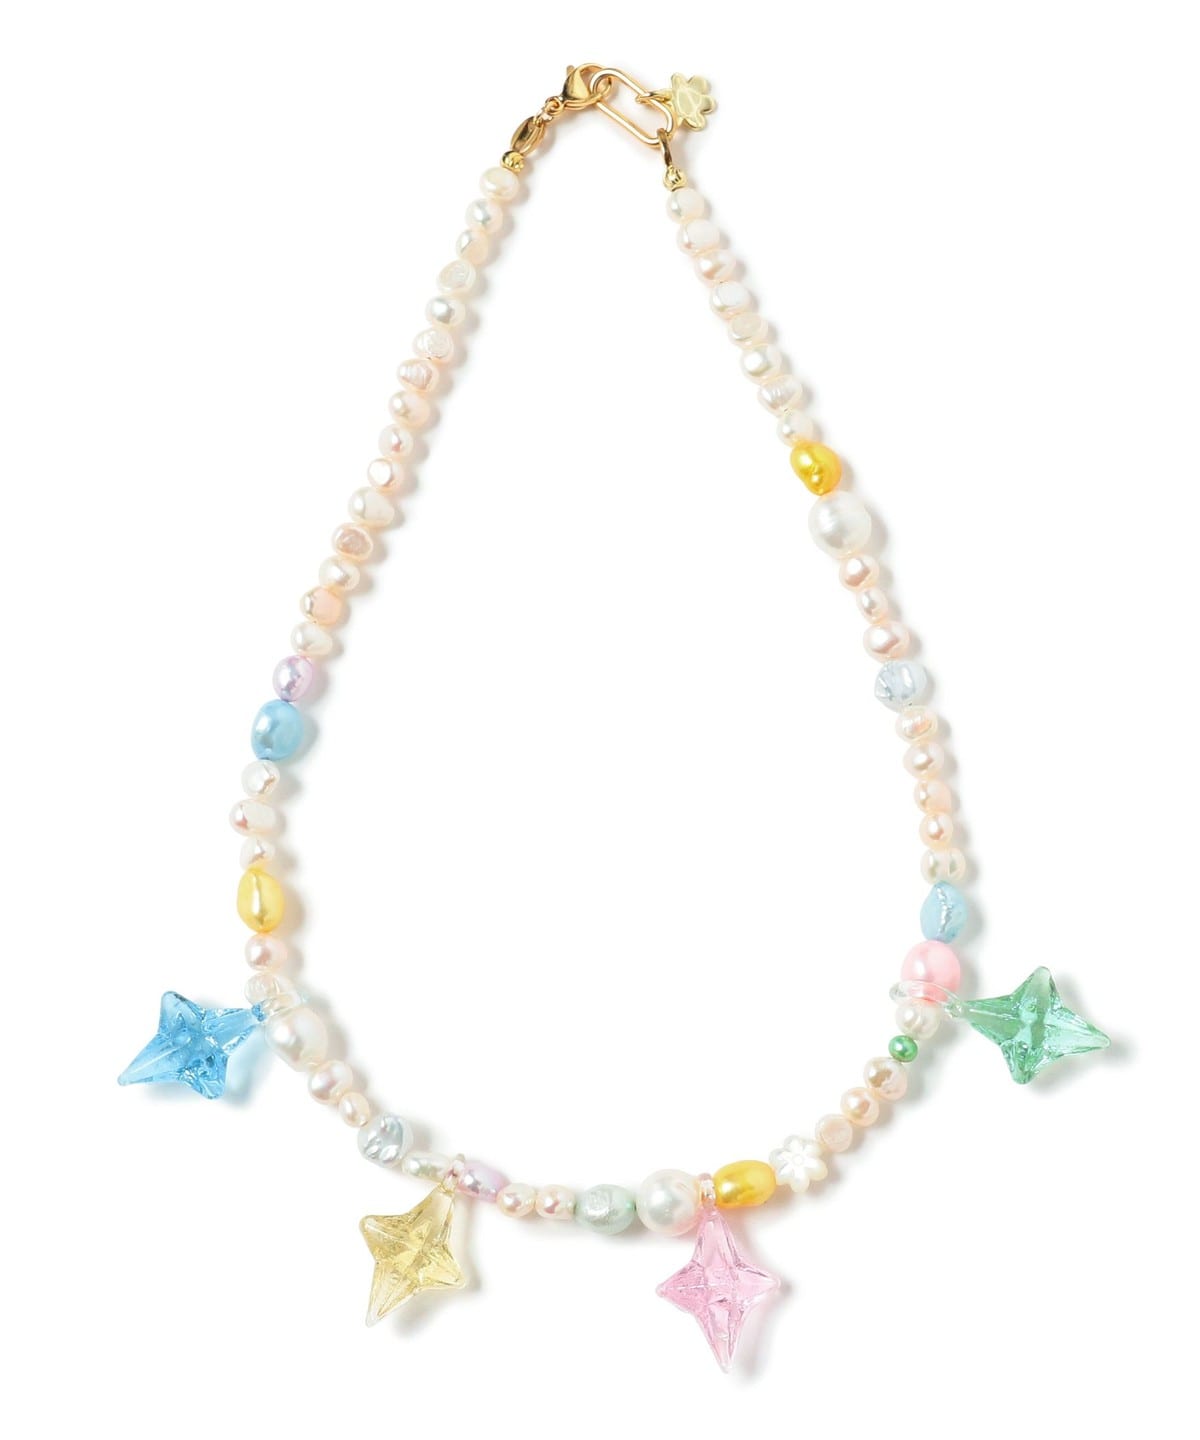 Ray BEAMS（レイ ビームス）〇NOTTE / SPARKLY NIGHT PEARLY NECKLACE 